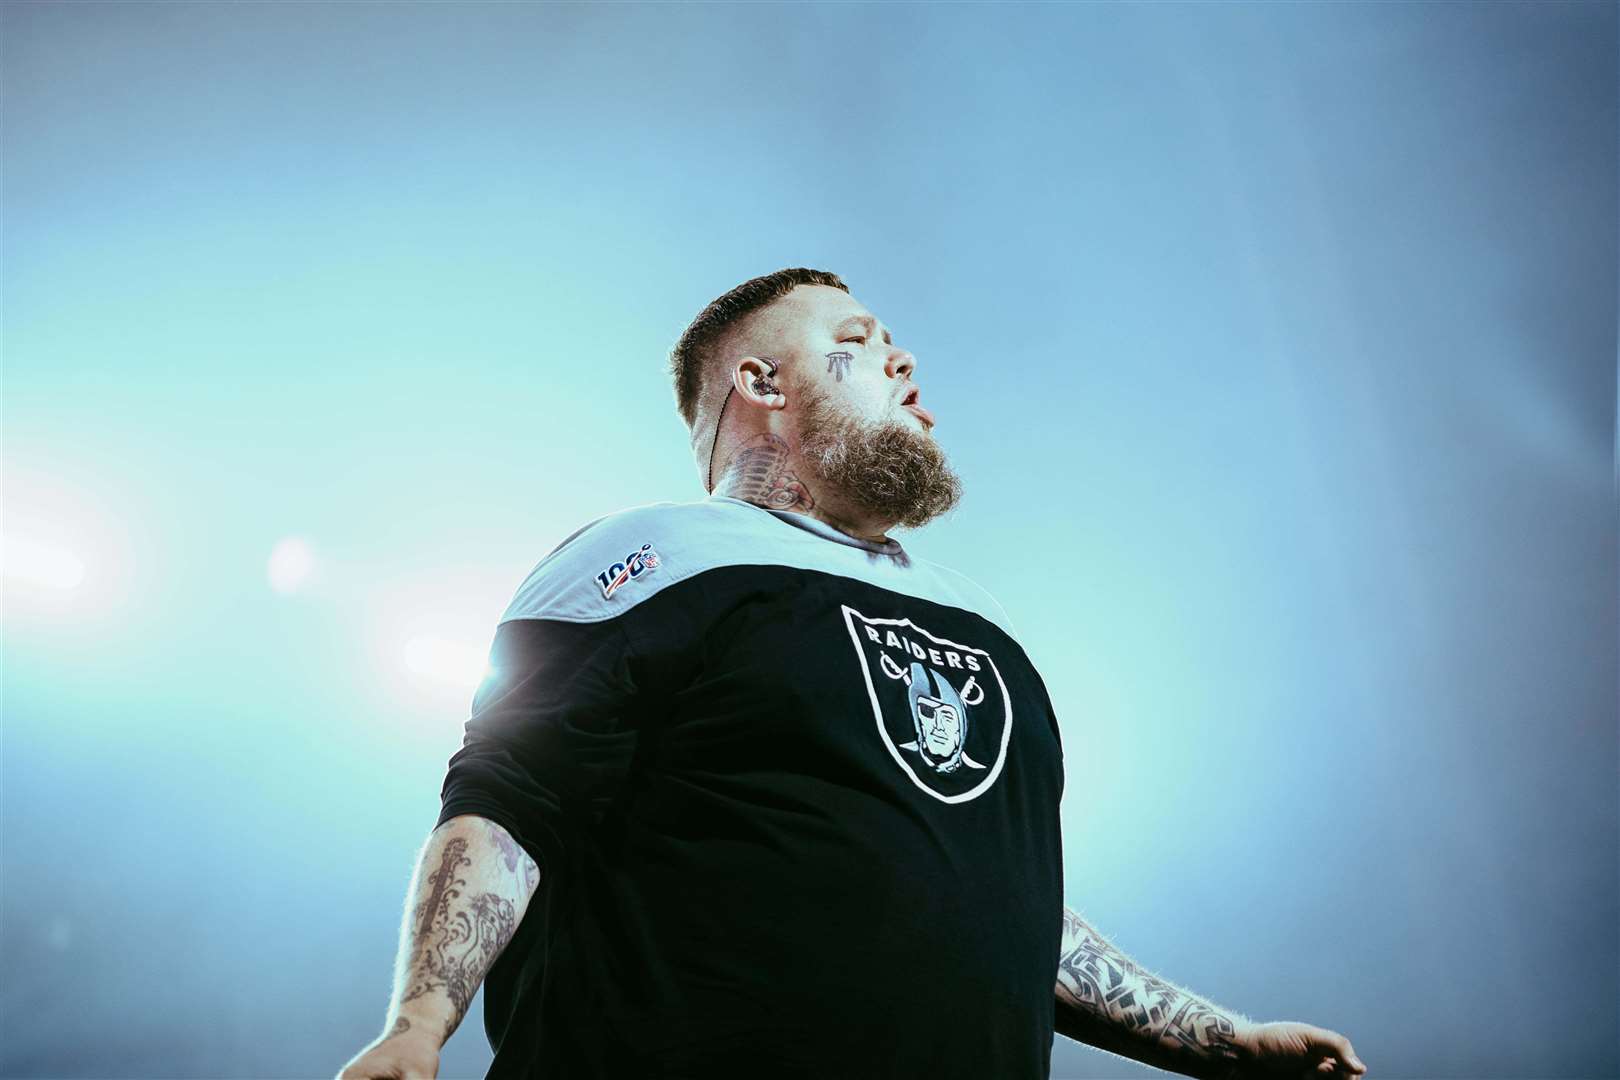 Rag 'n' Bone Man will play in Inverness for the first time this year.